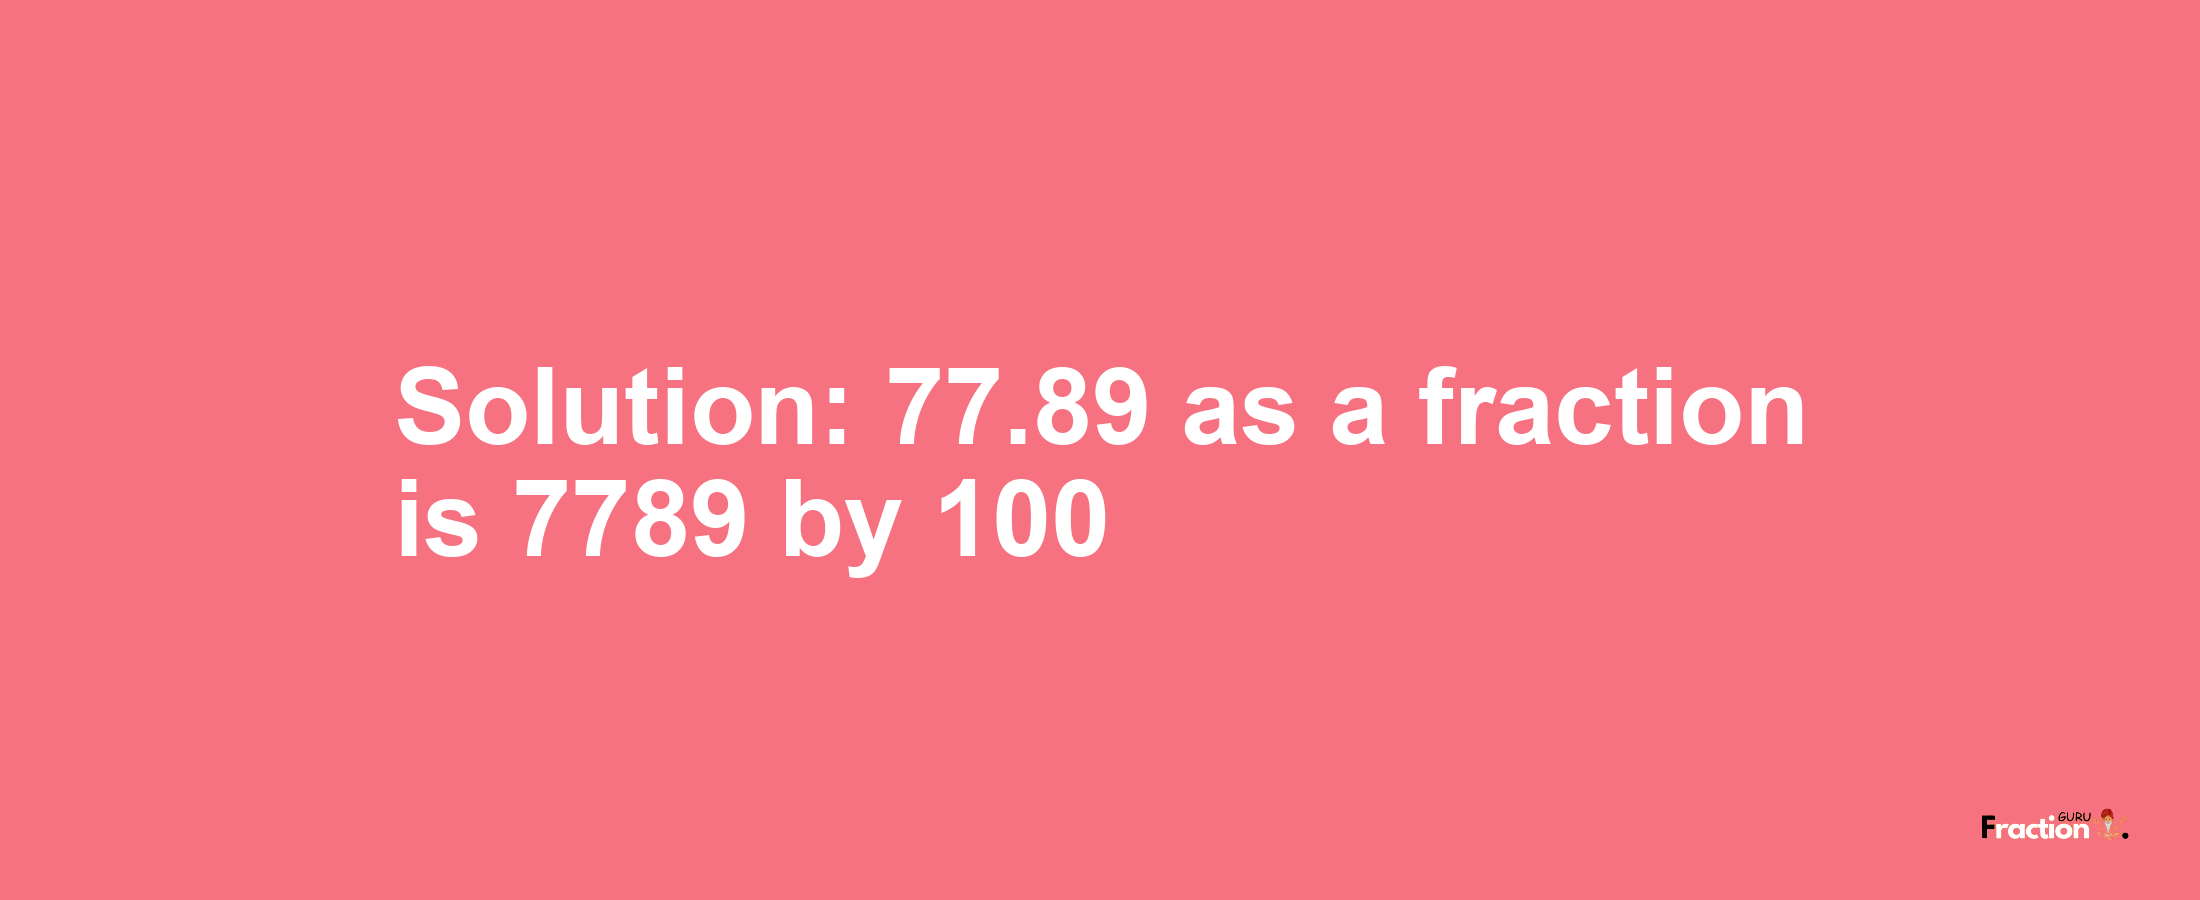 Solution:77.89 as a fraction is 7789/100